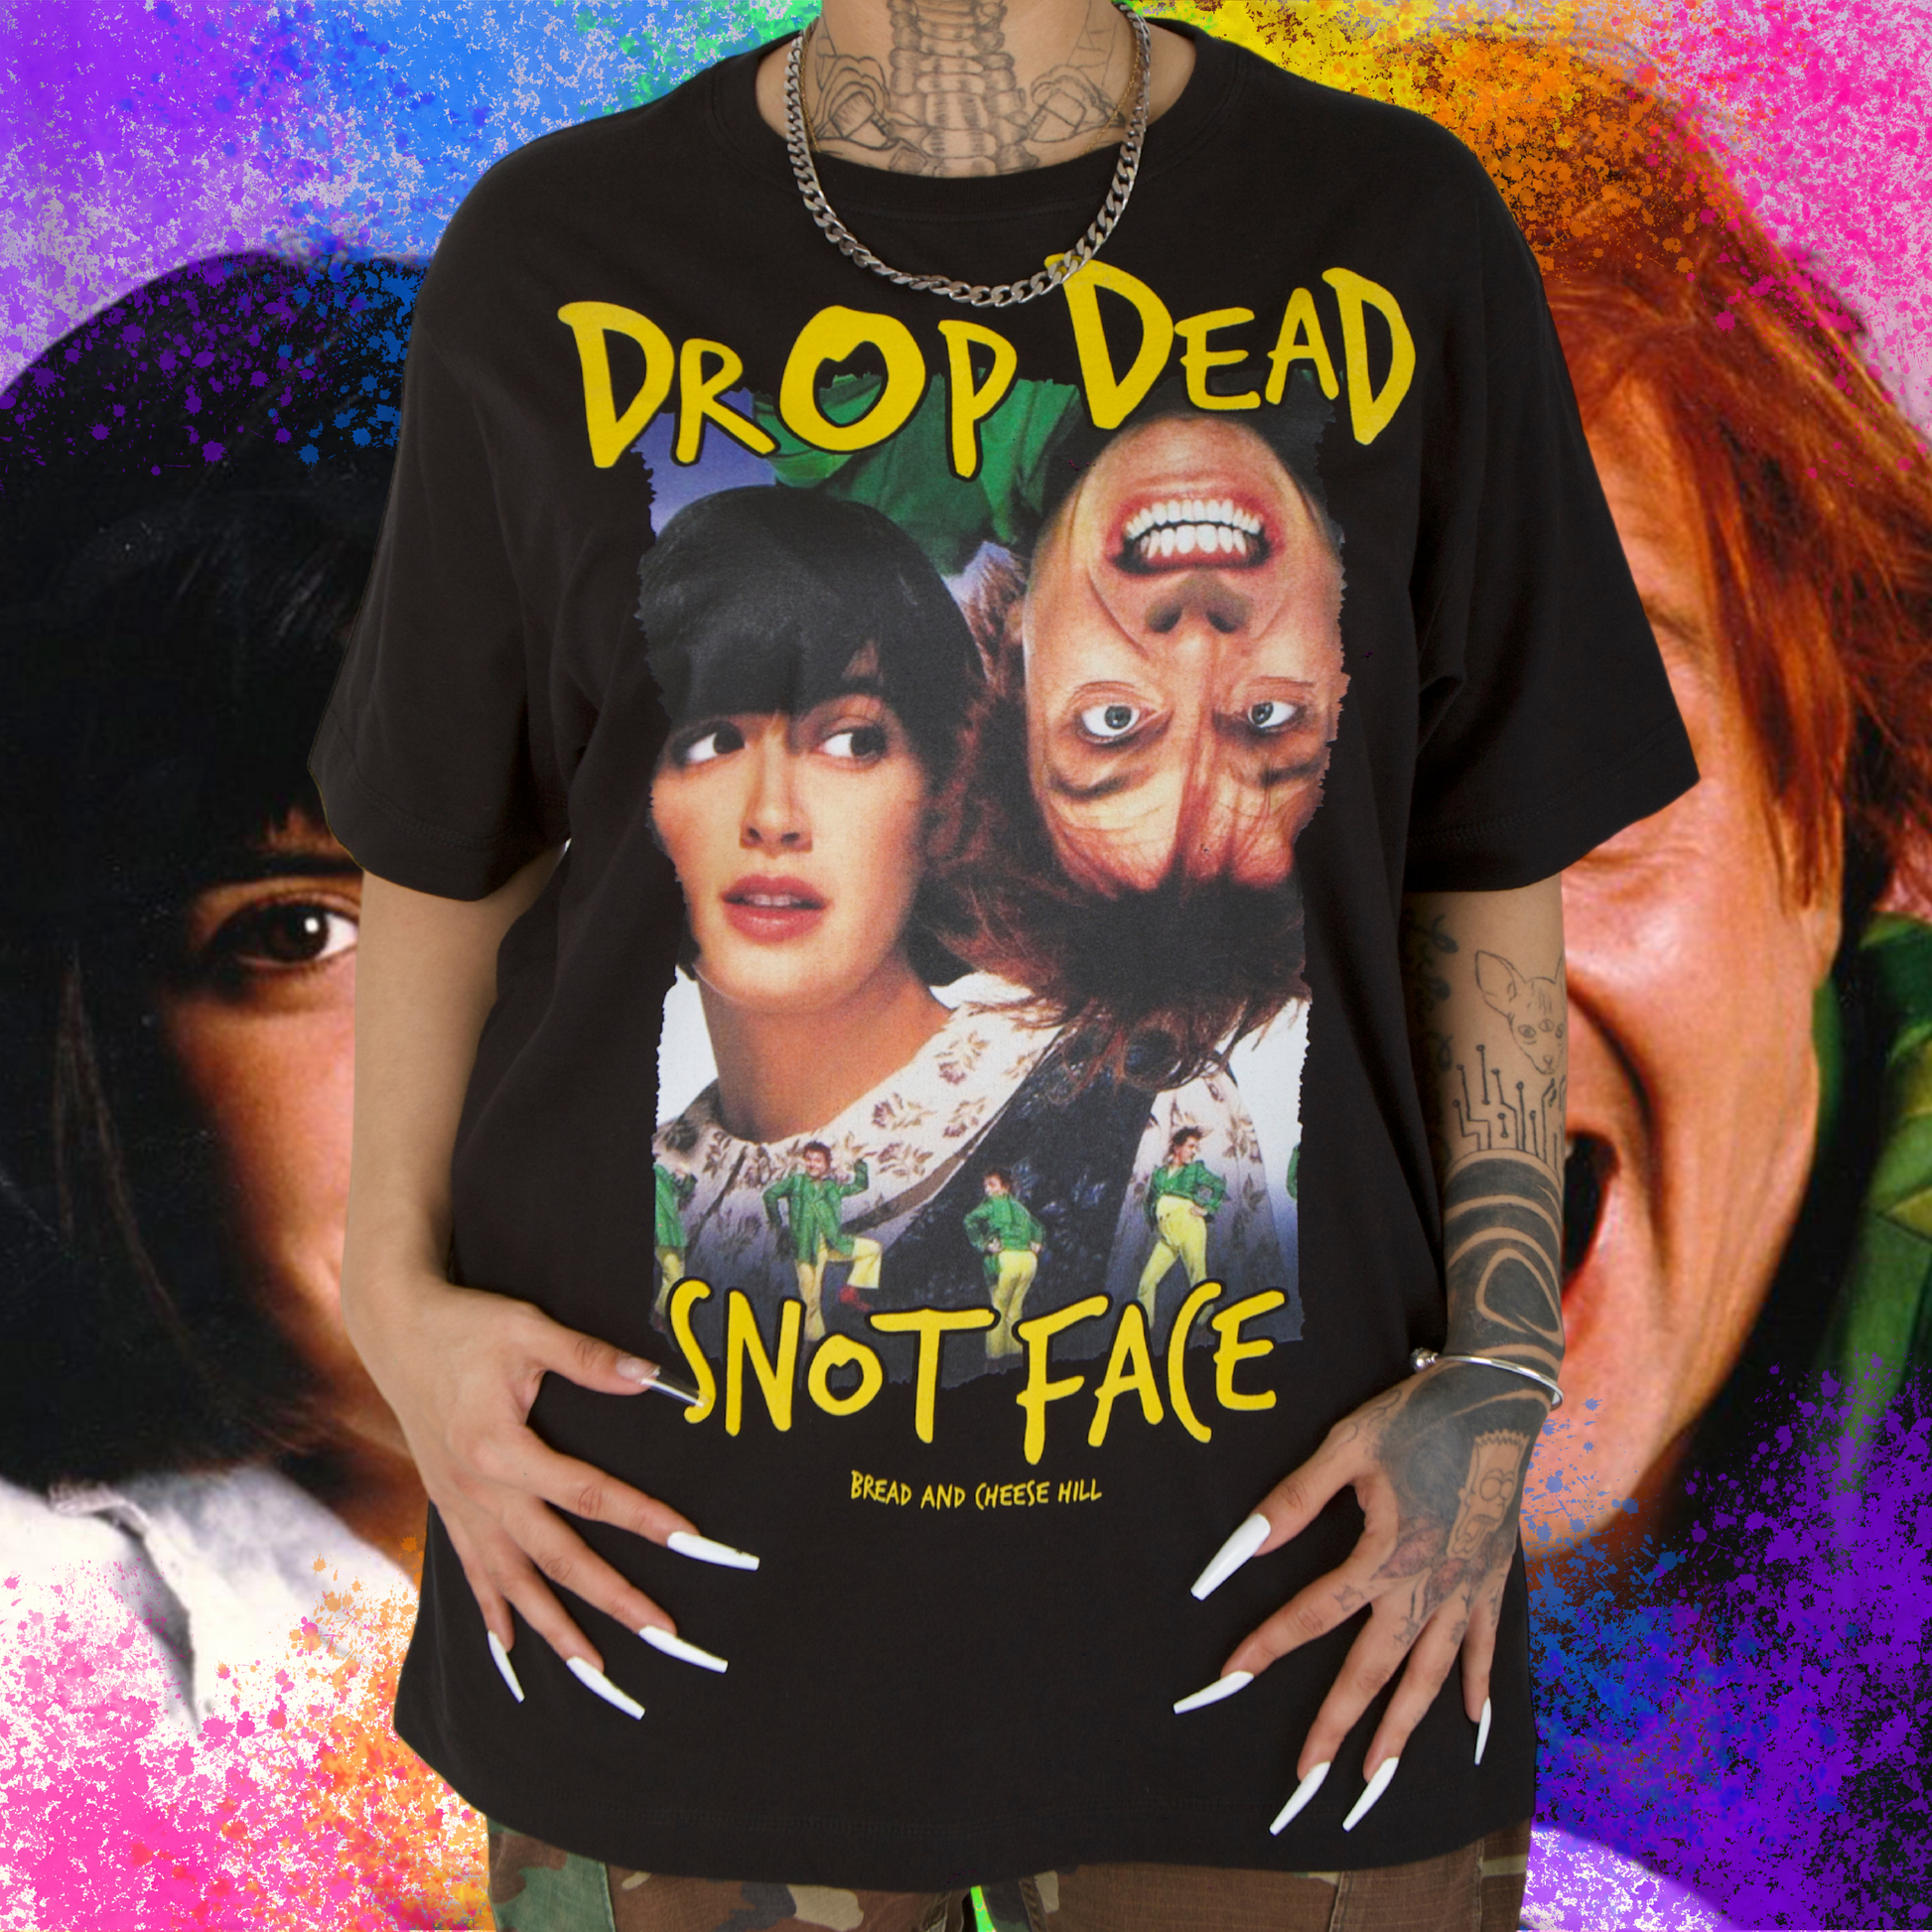 Drop Dead Fred - Snot Face - BACH T-ShirtBread And Cheese Hill